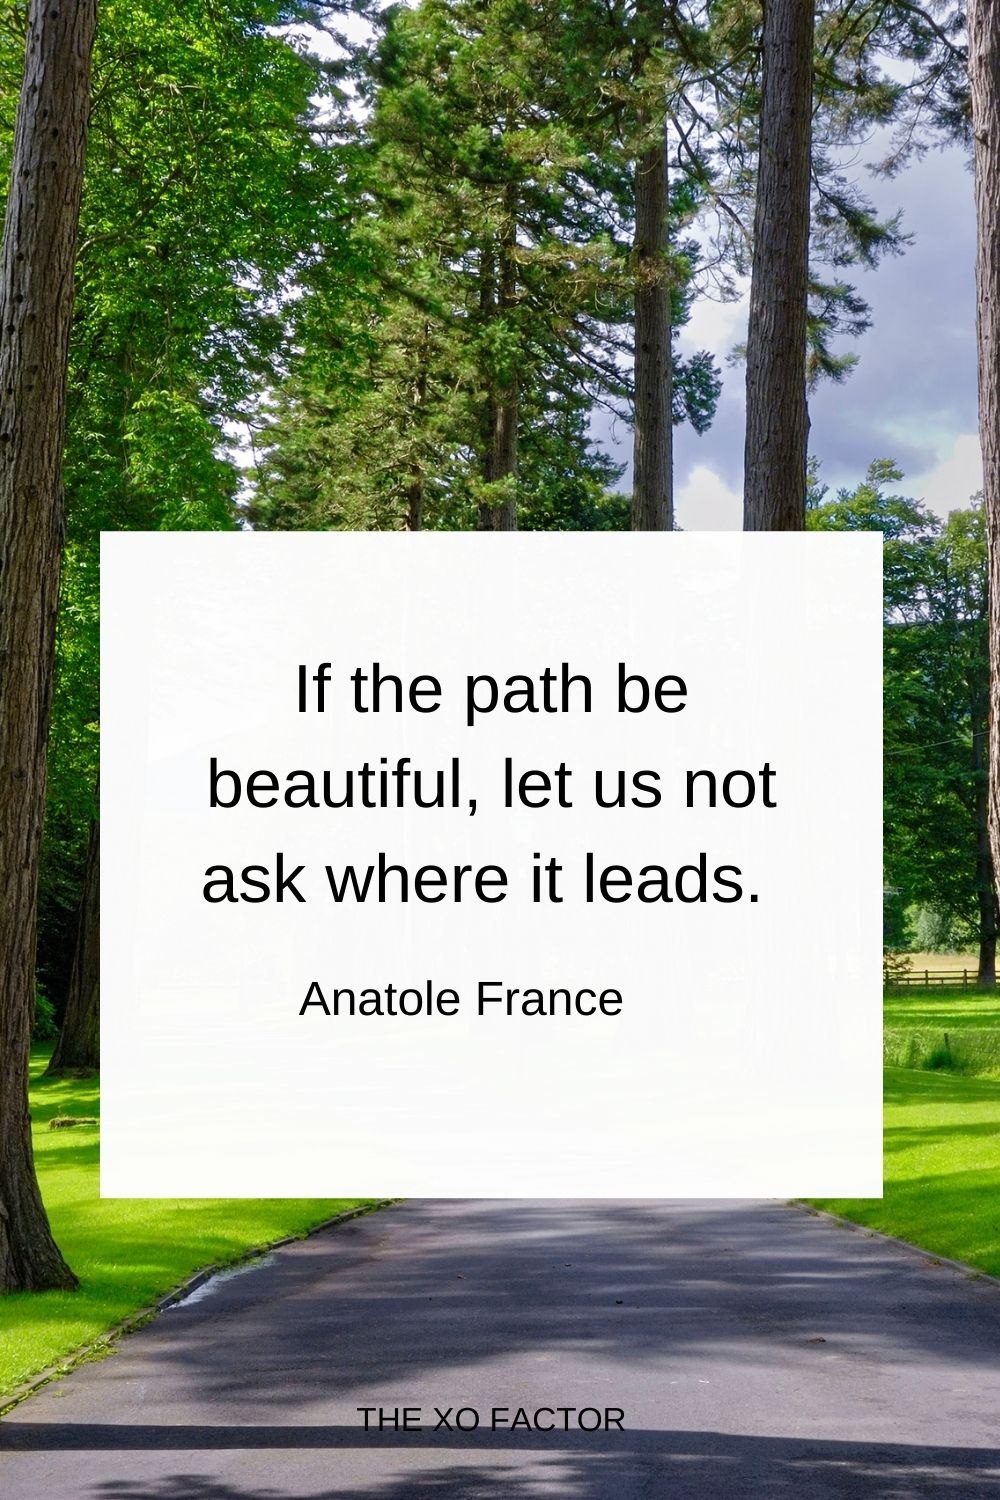 If the path be beautiful, let us not ask where it leads. Anatole France